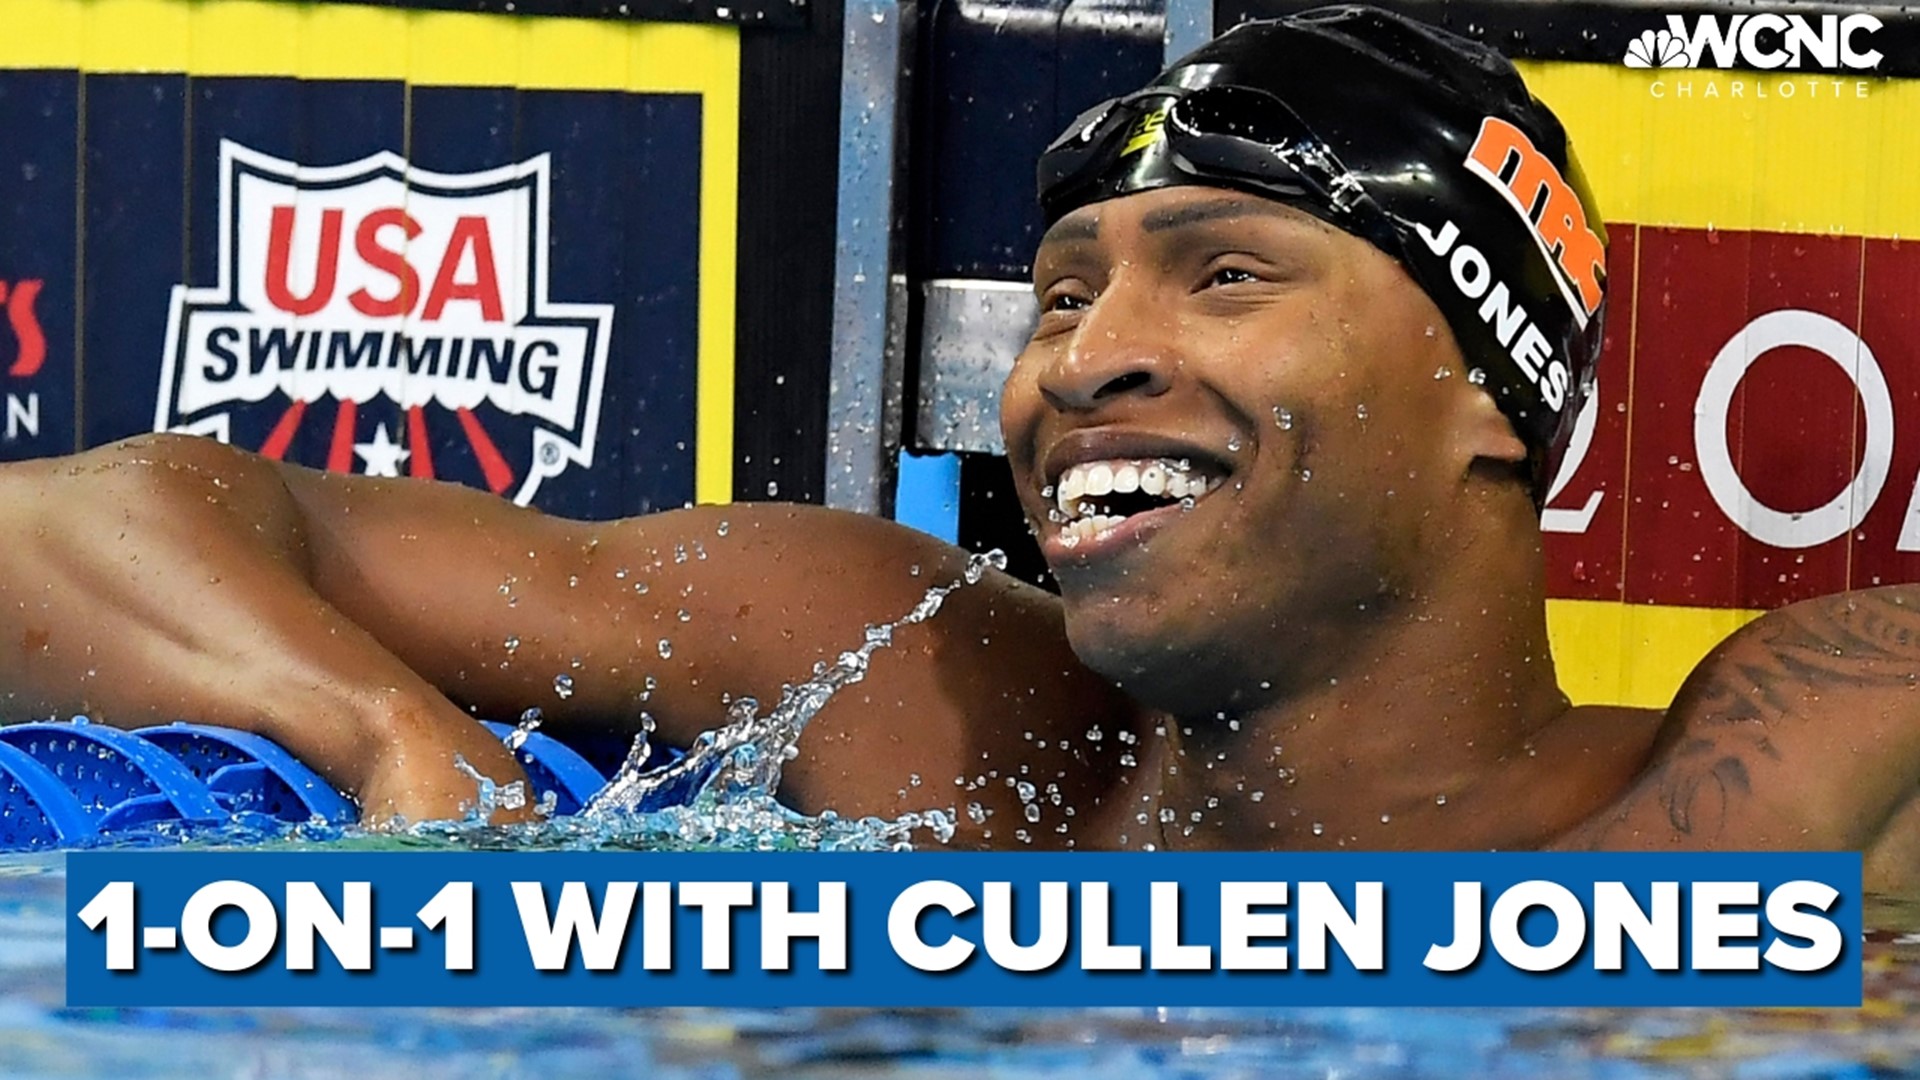 Ahead of the Kappa Swim Club Pilot Event, Cullen Jones, a four-time Olympic medalist, spoke with WCNC Charlotte's Ashley Stroehlein.